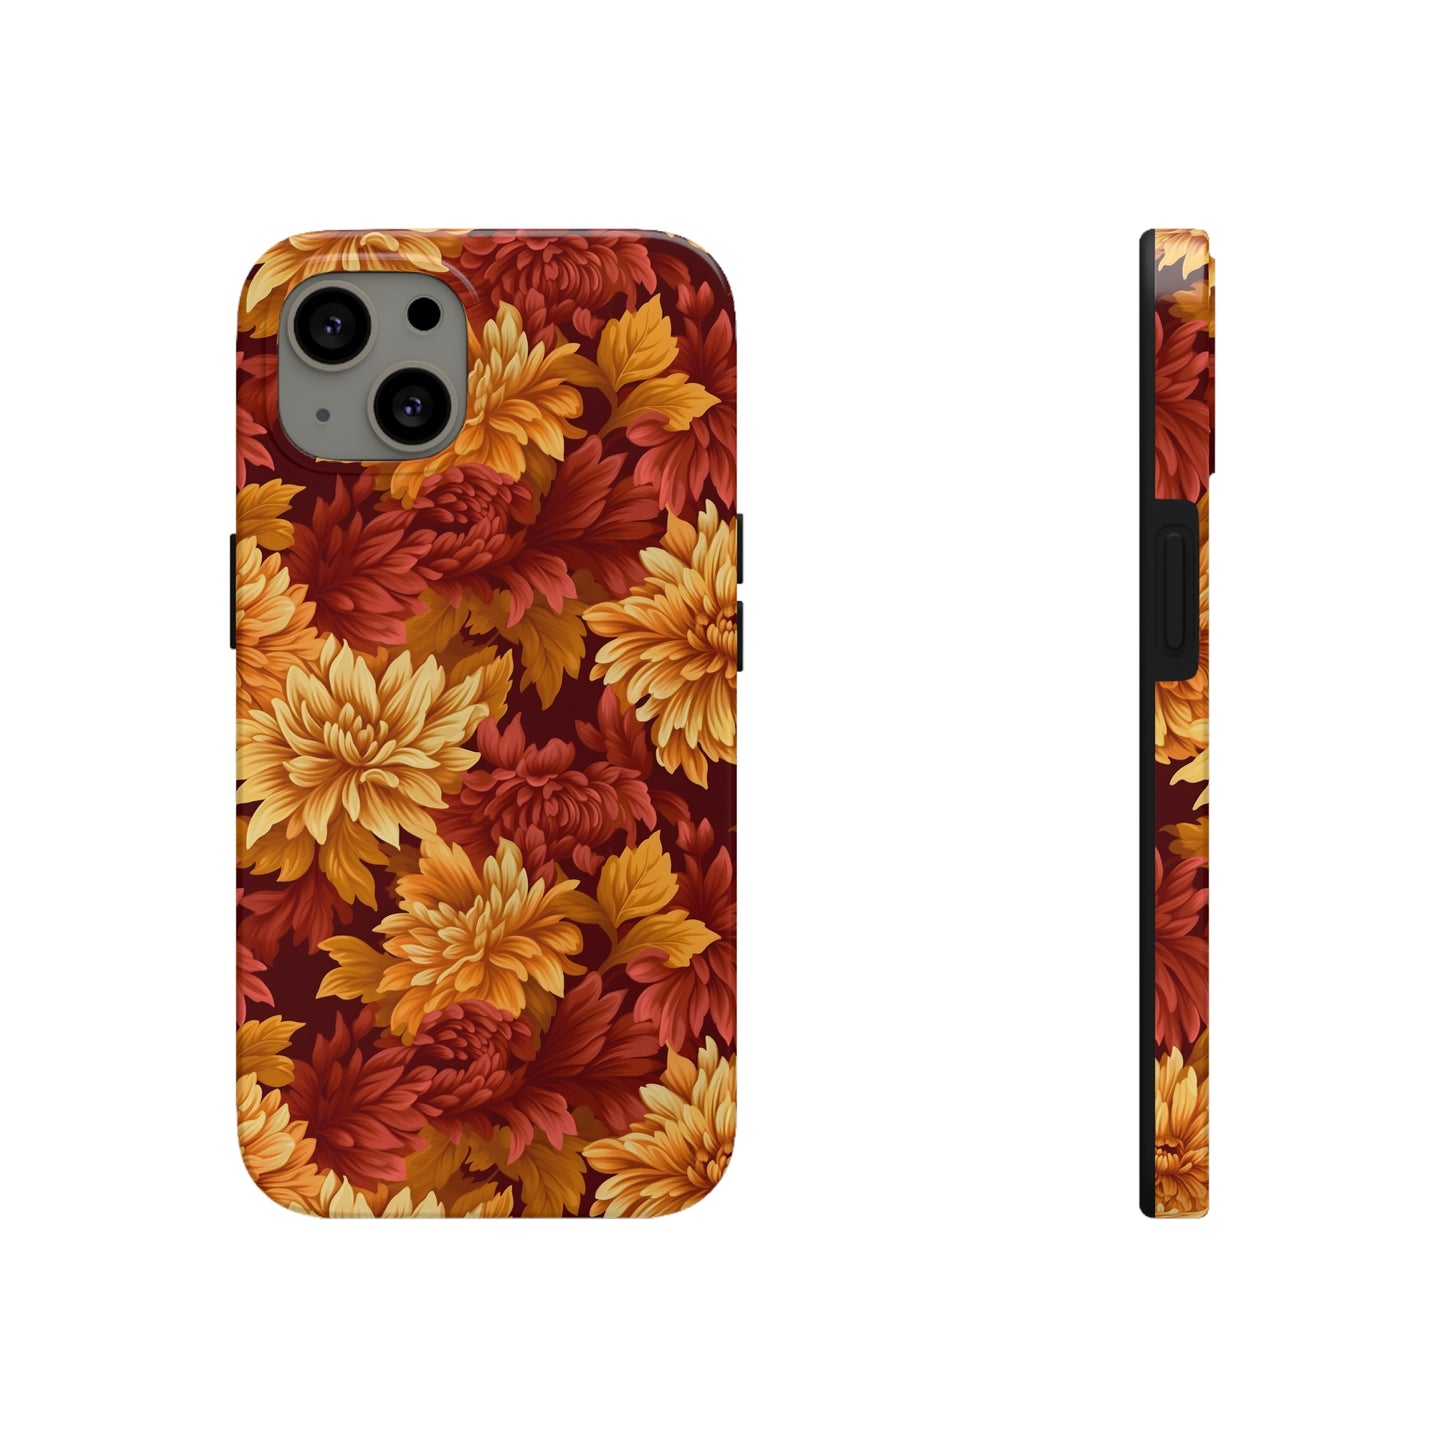 Fall Phone Case / Autumn Floral Iphone Case